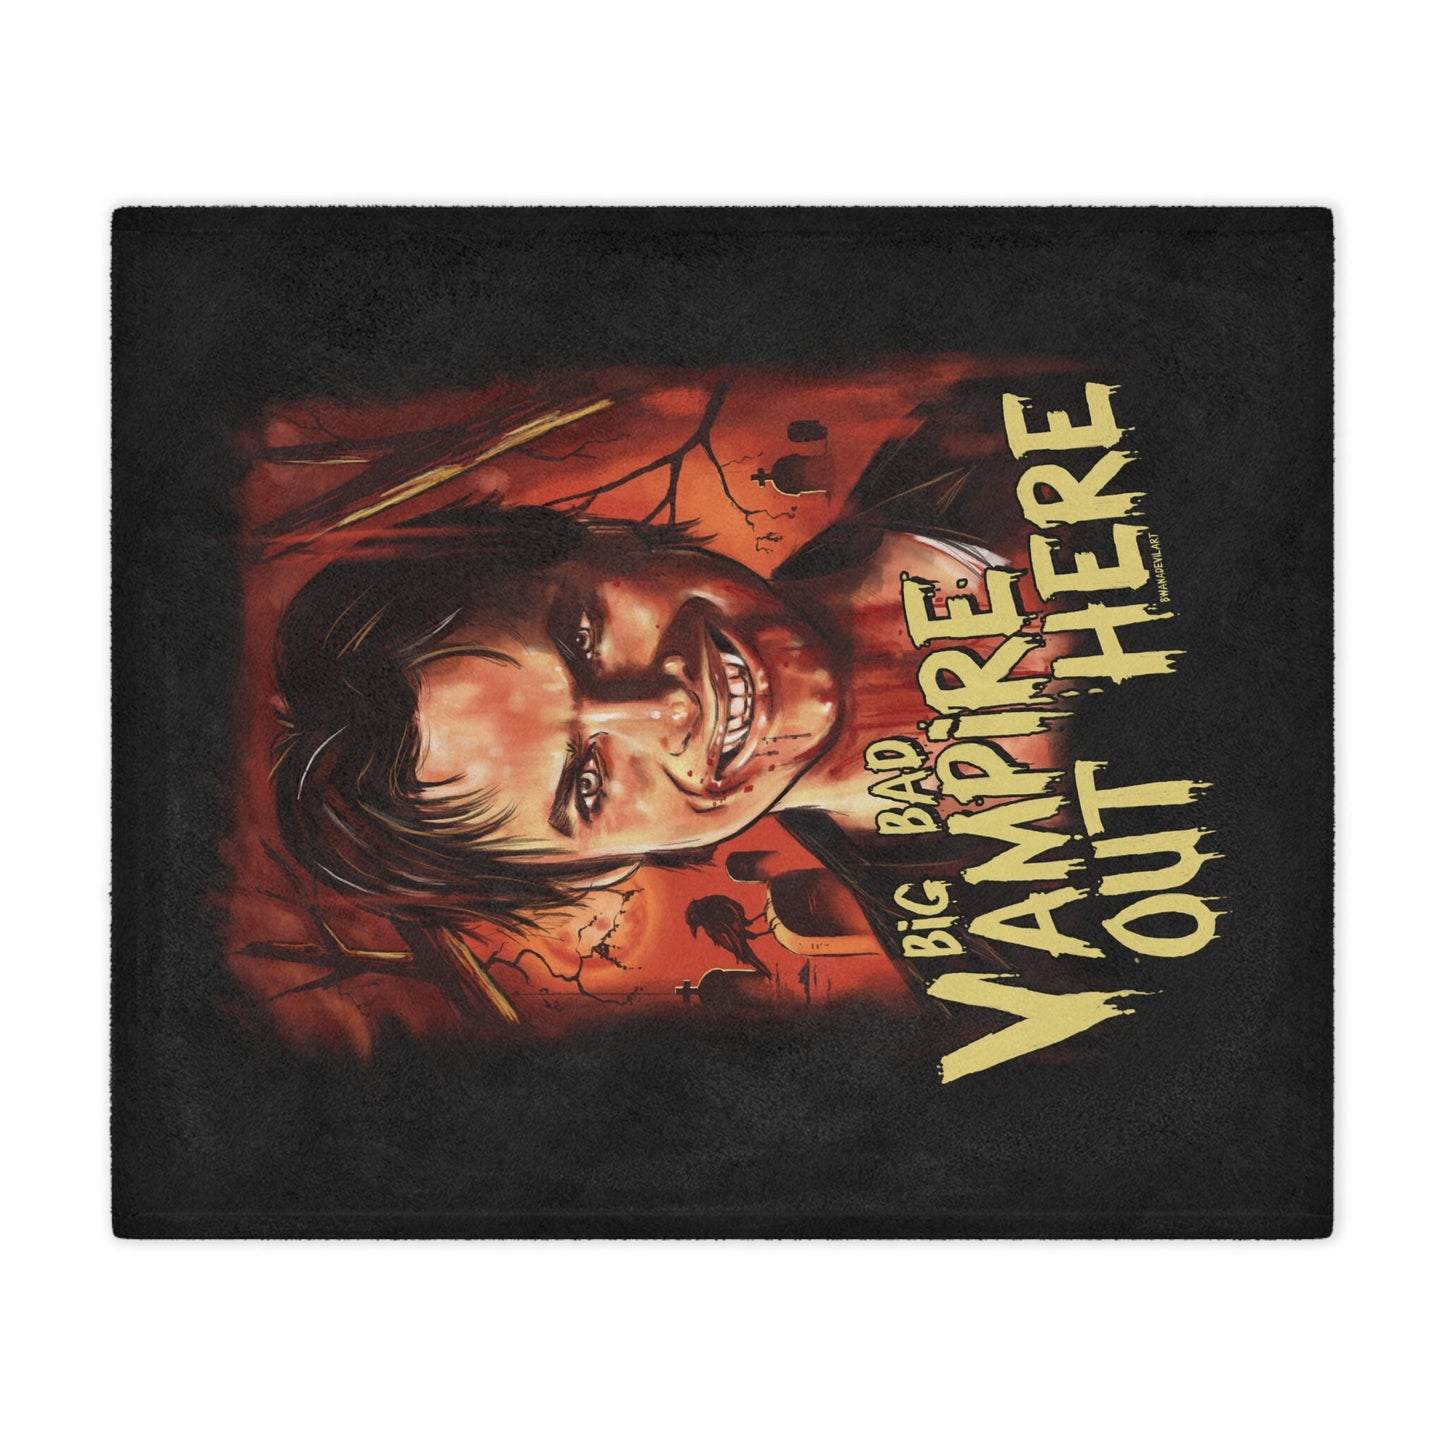 TVD Blanket, This is my TVD watching Blanket, TVD merch, Tvd fan gift, The Vampire diaries, Damon Salvatore blanket, I was feeling epic